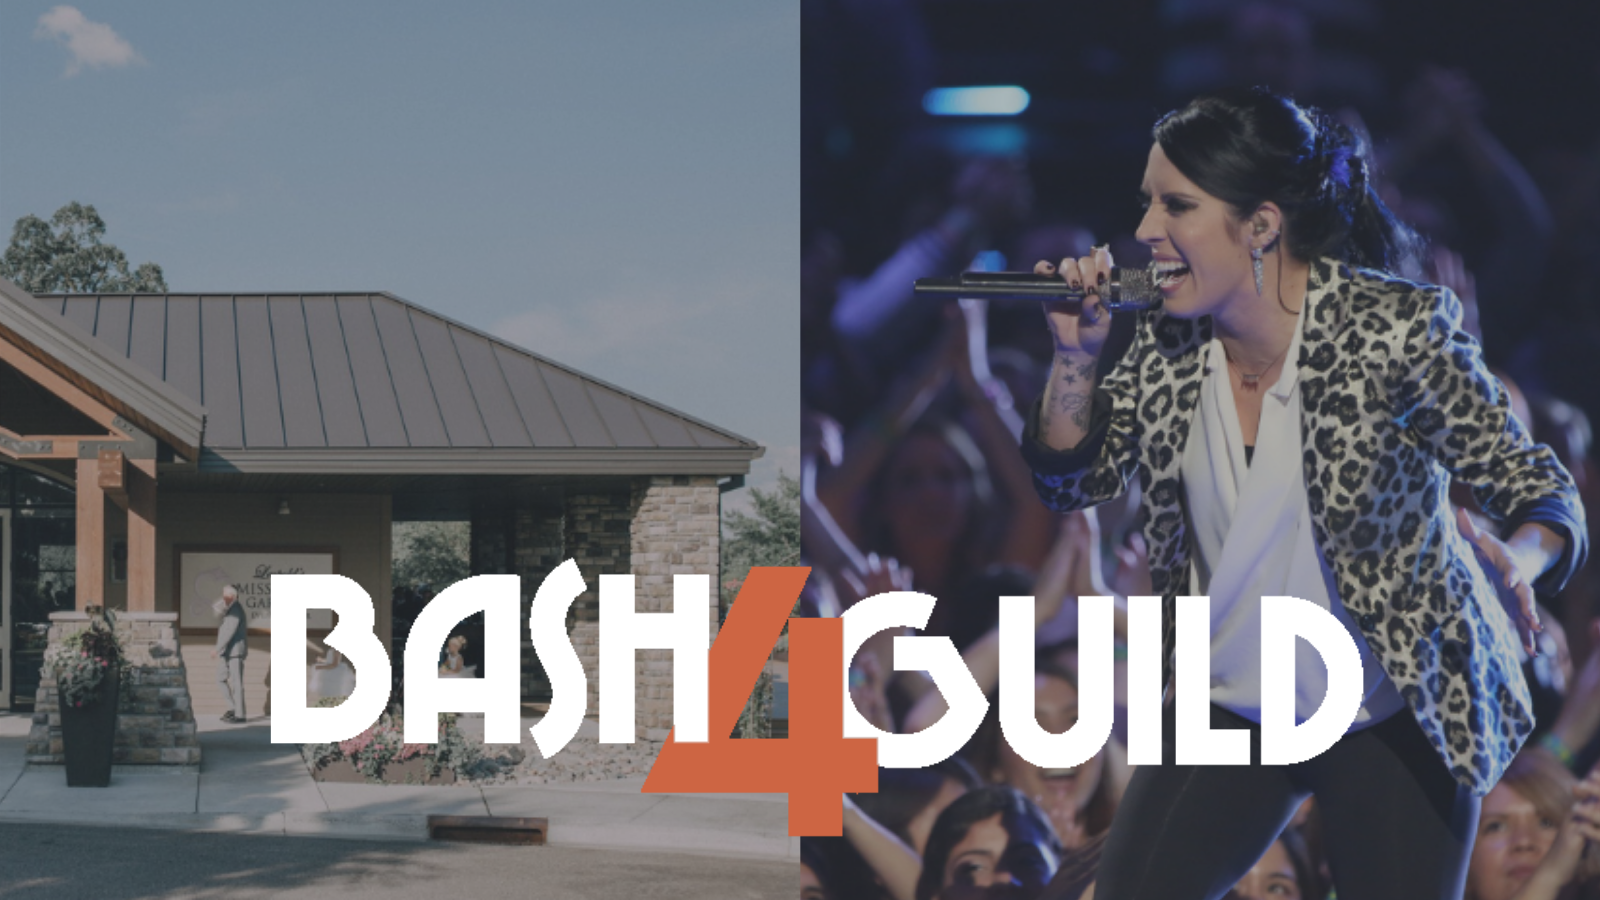 the words "Bash4Guild" with the venue and a photo of the singer Kat Perkins